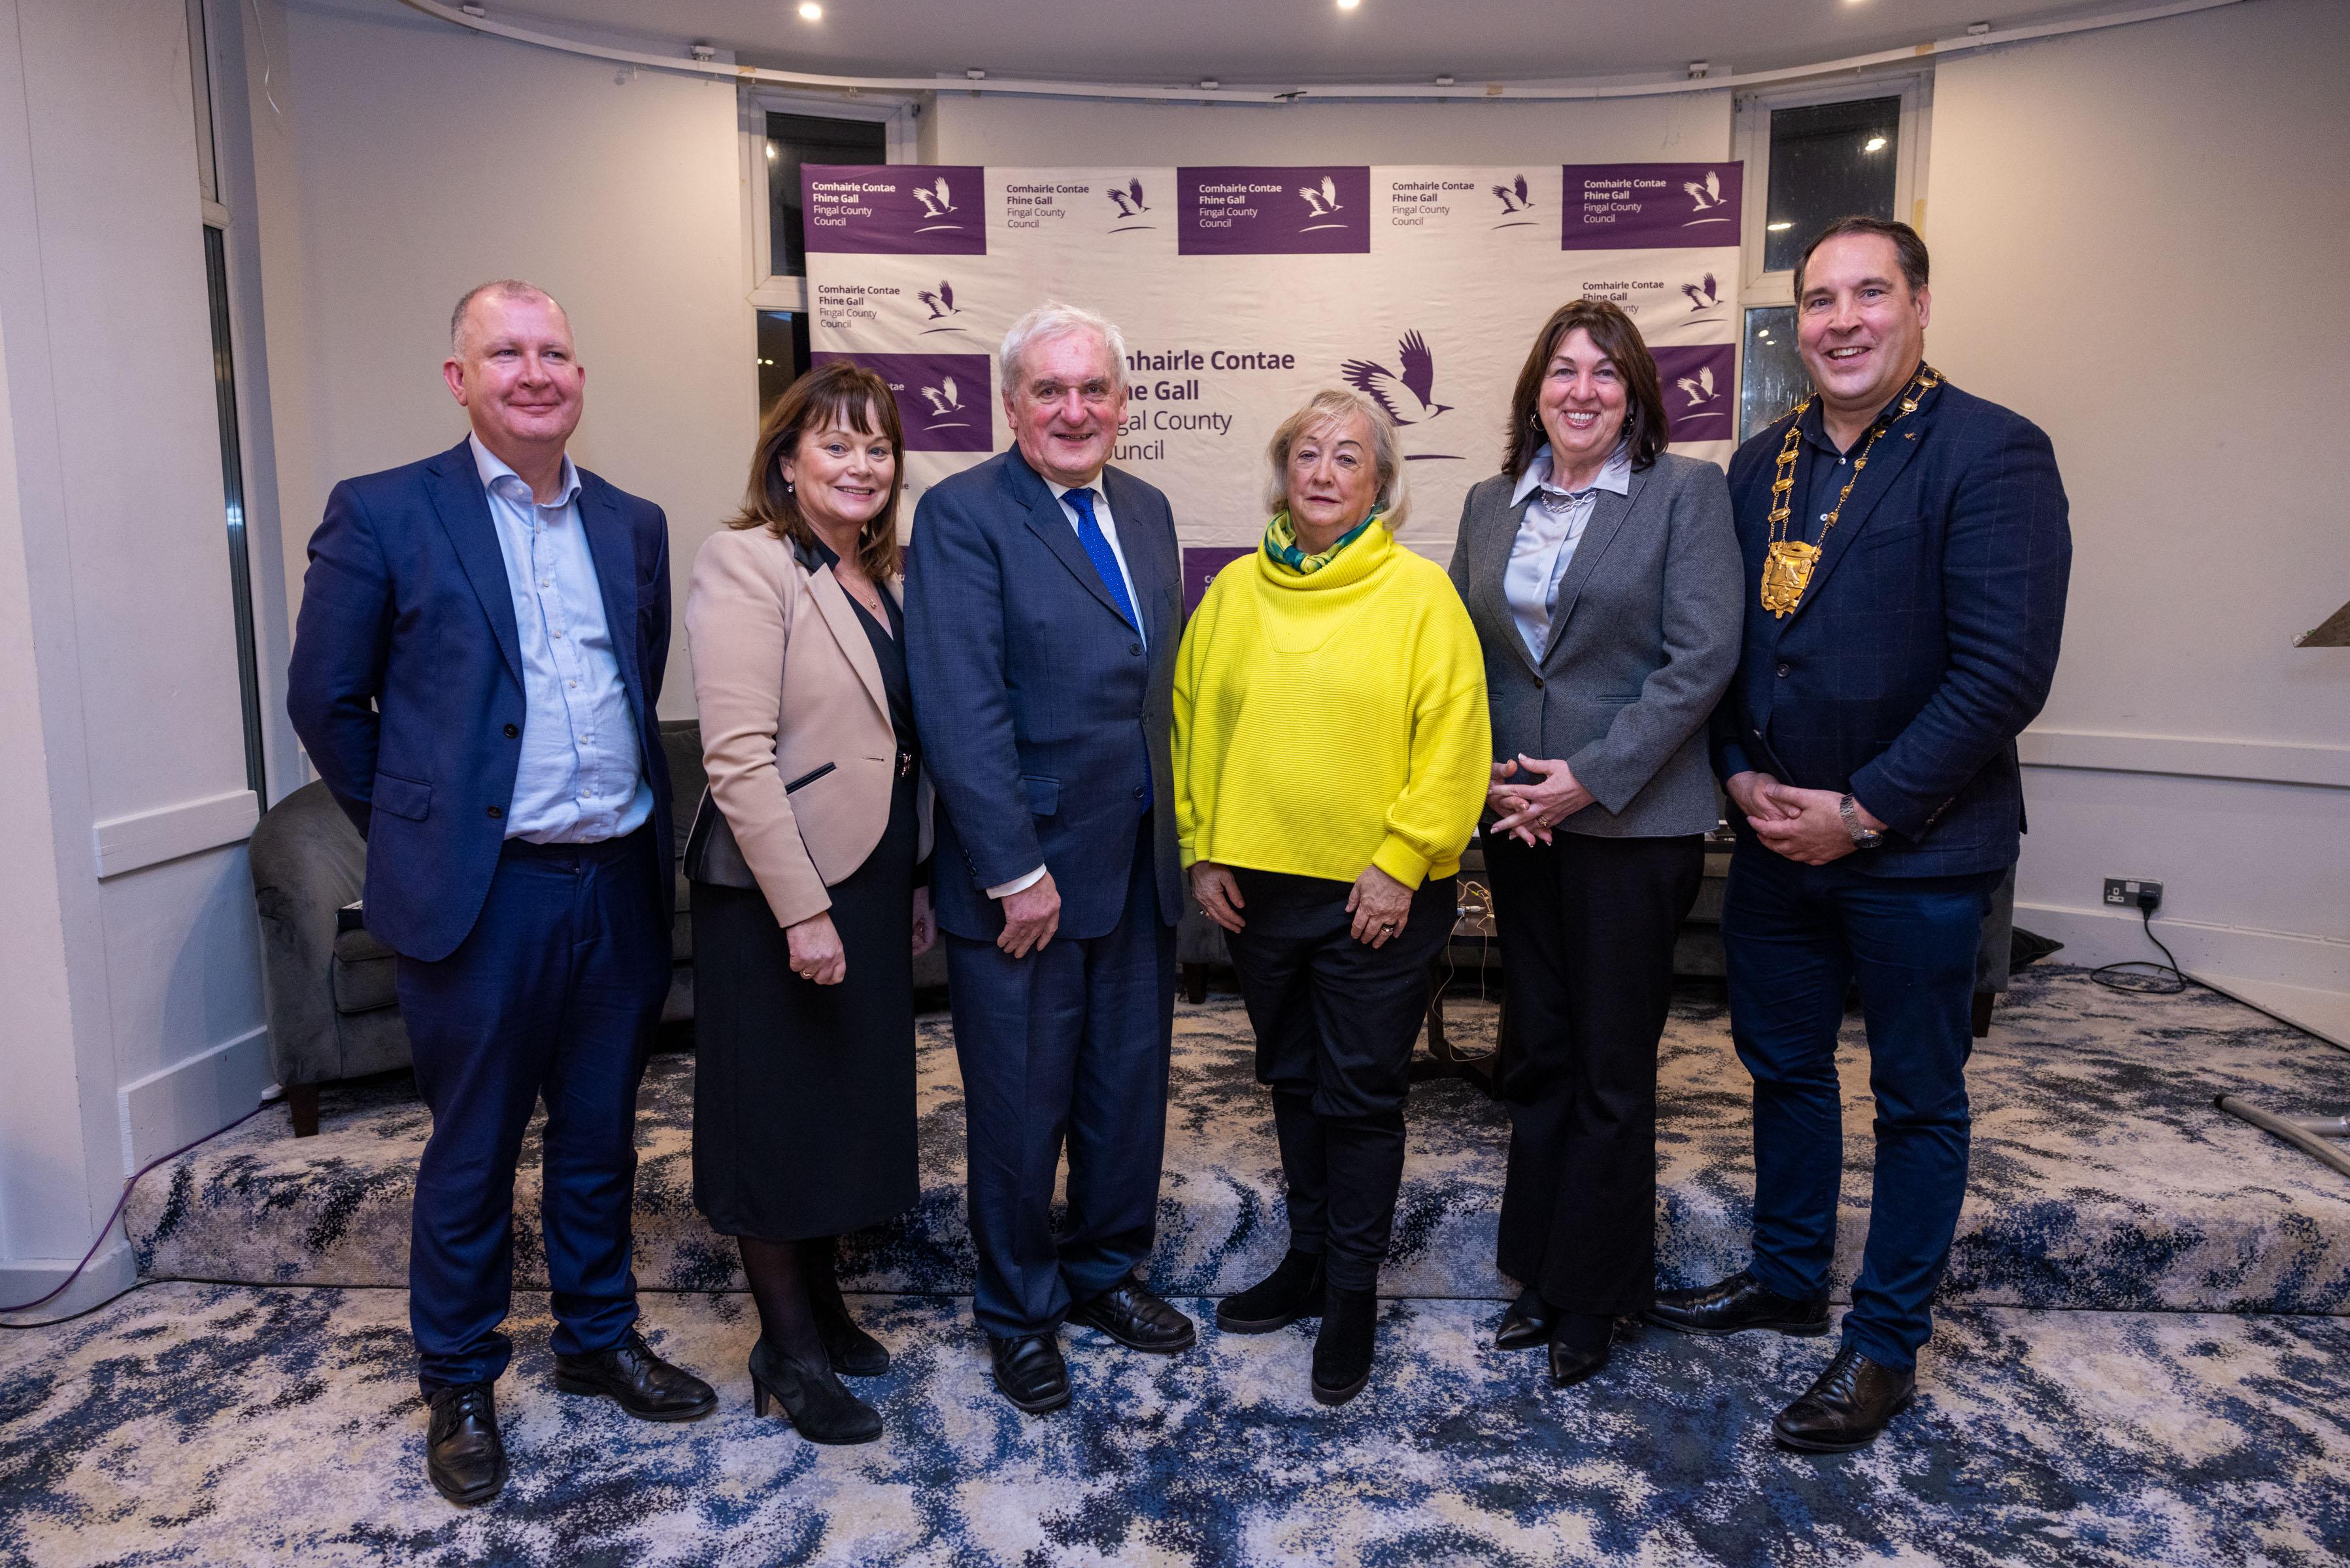 Fingal Celebrates 25 Years of the Good Friday Agreement